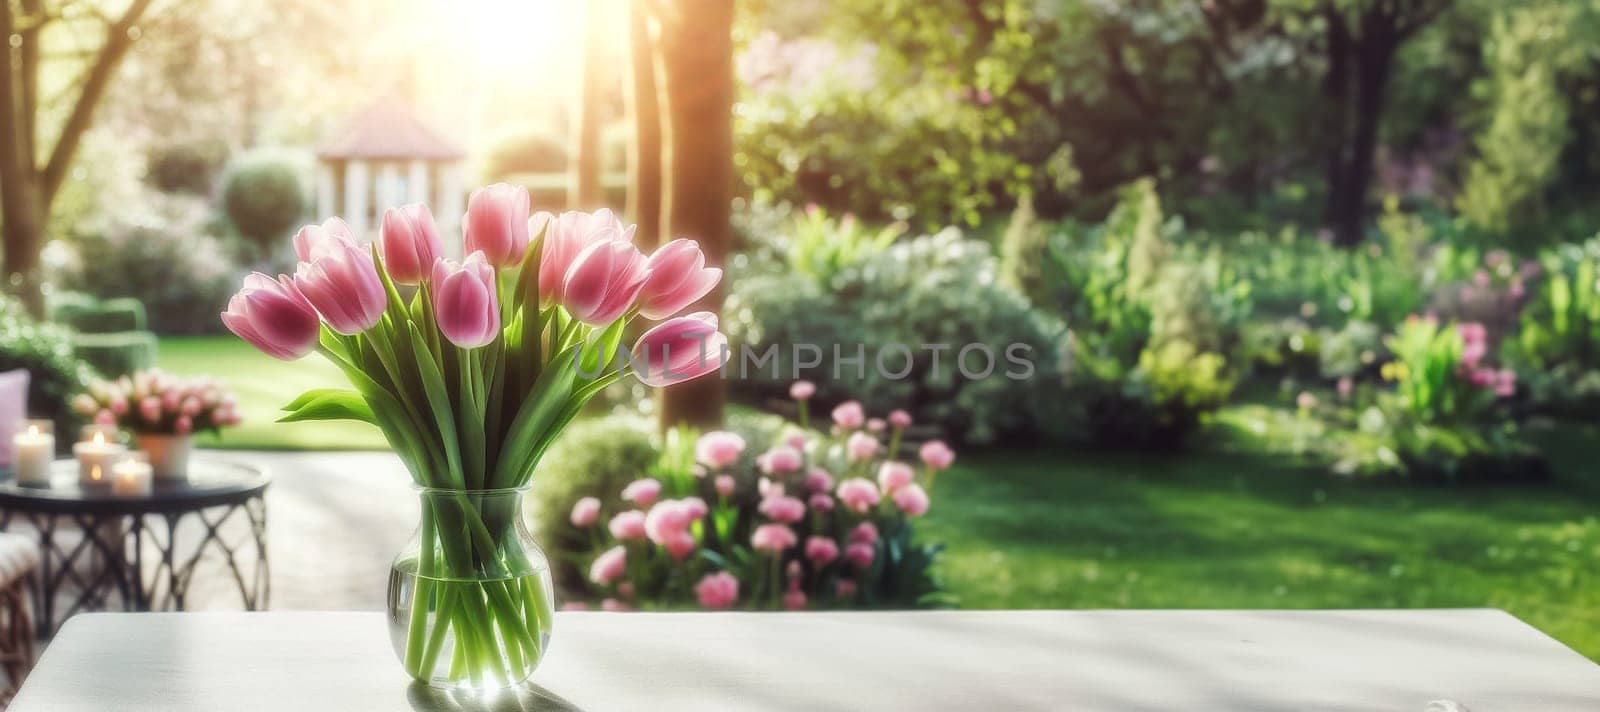 Bouquet pink tulips in glass vase on table in garden on sunny spring day, blurred background with bokeh, still life.